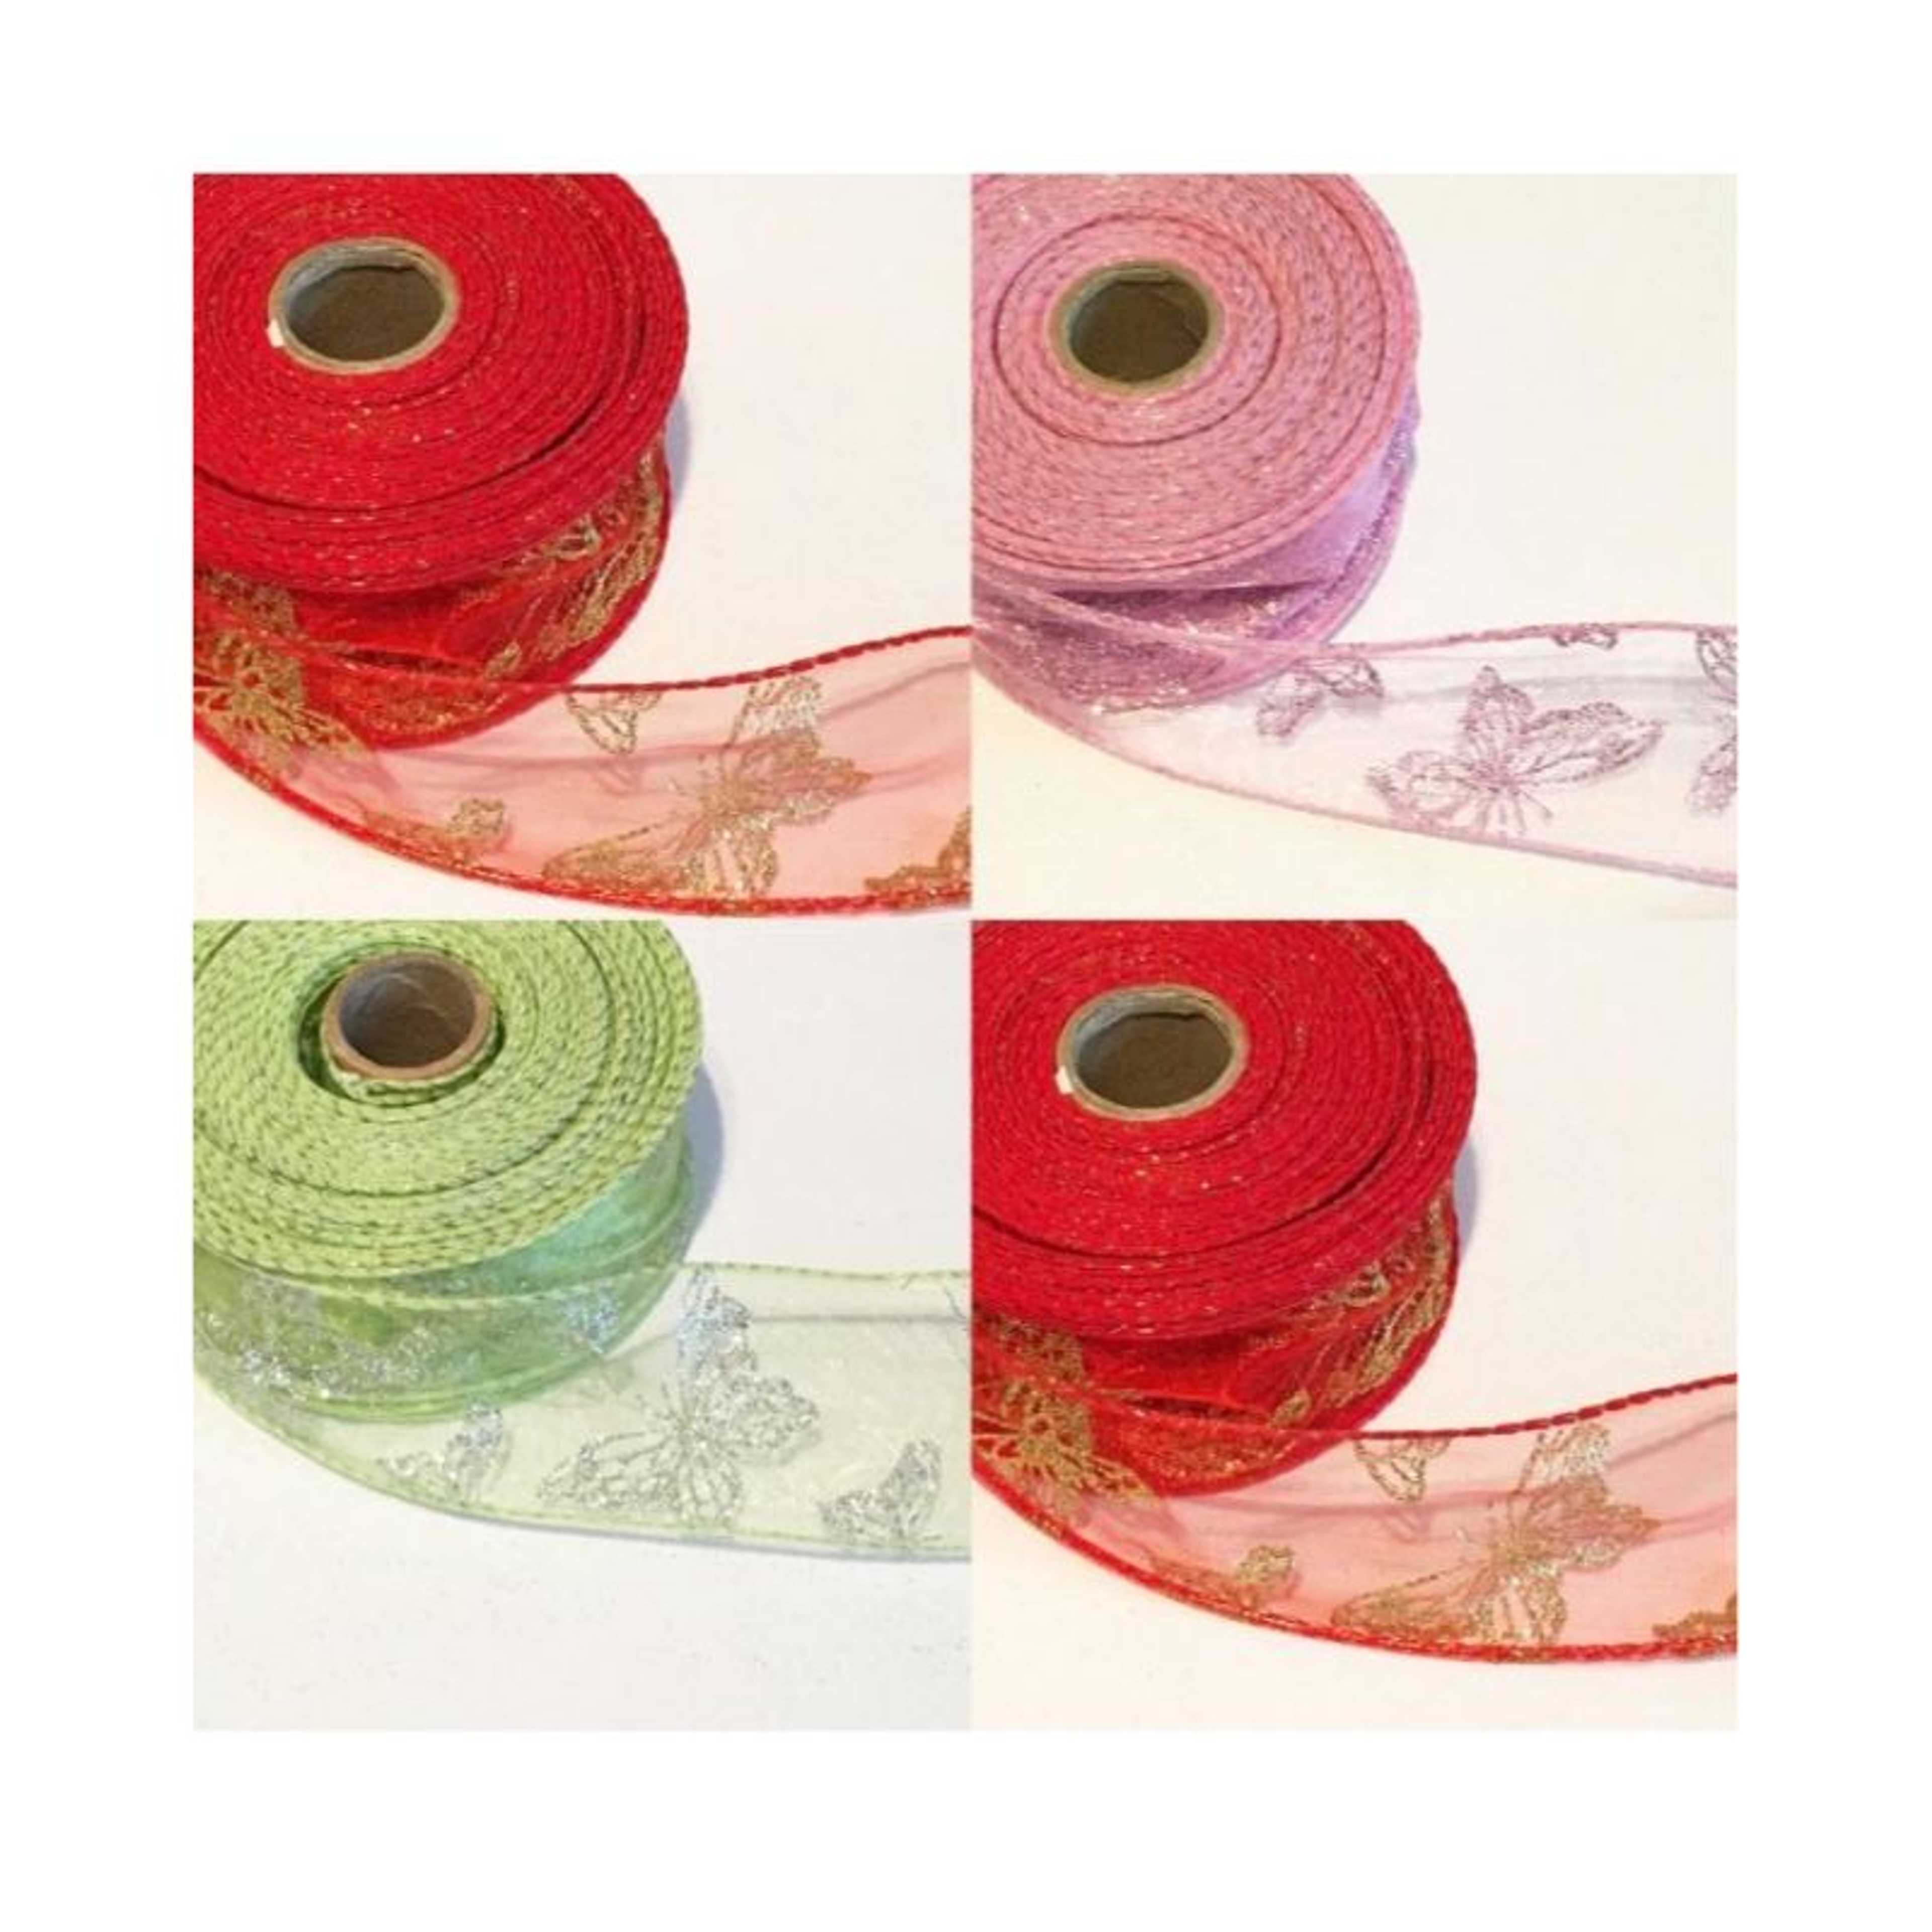 Pack of 4 - Assorted color Decorative Wired Edge Organza Ribbons